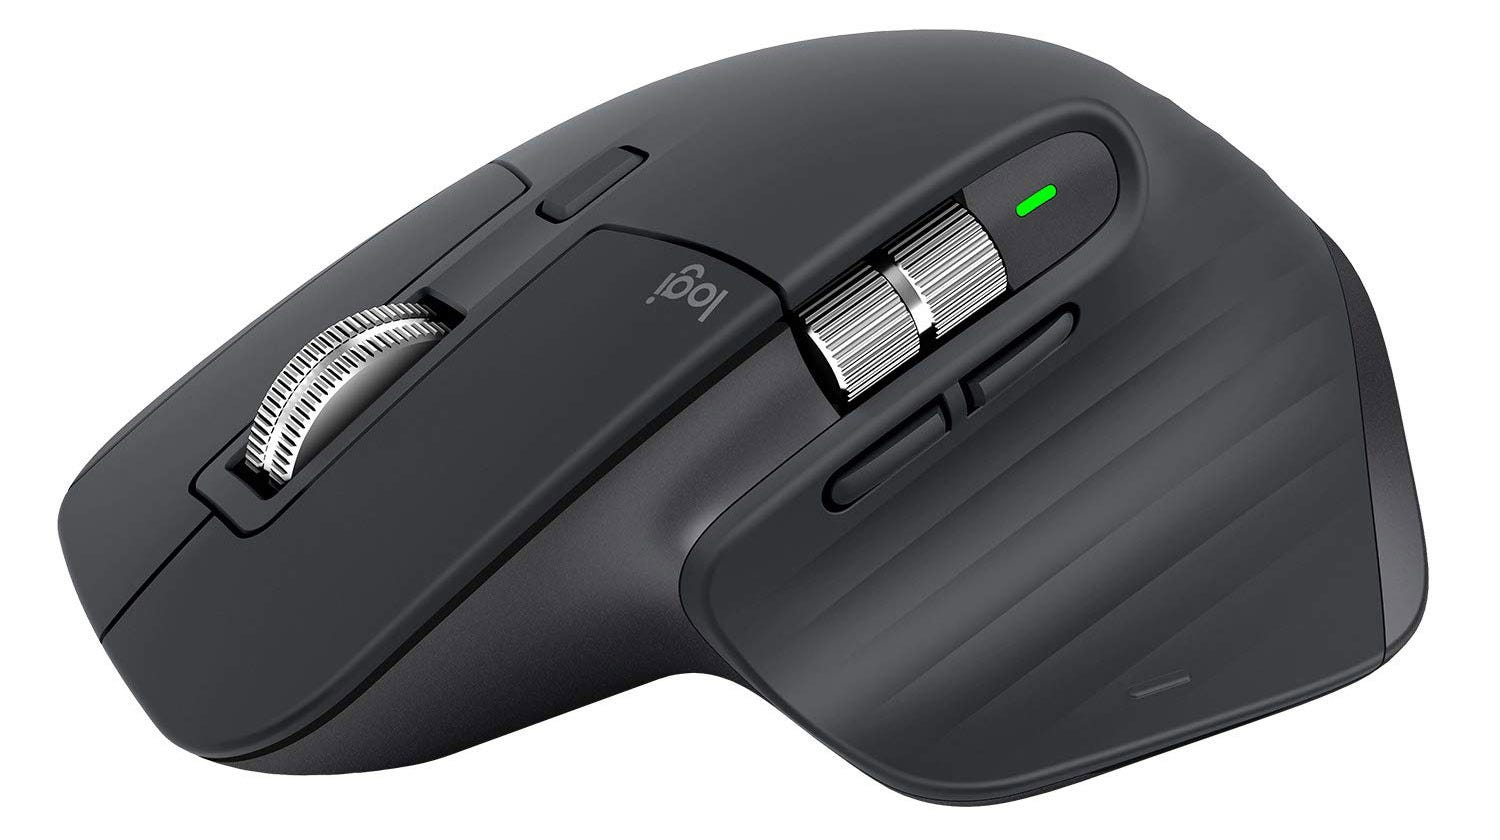 The Logitech MX Master 3 mouse, from the side.